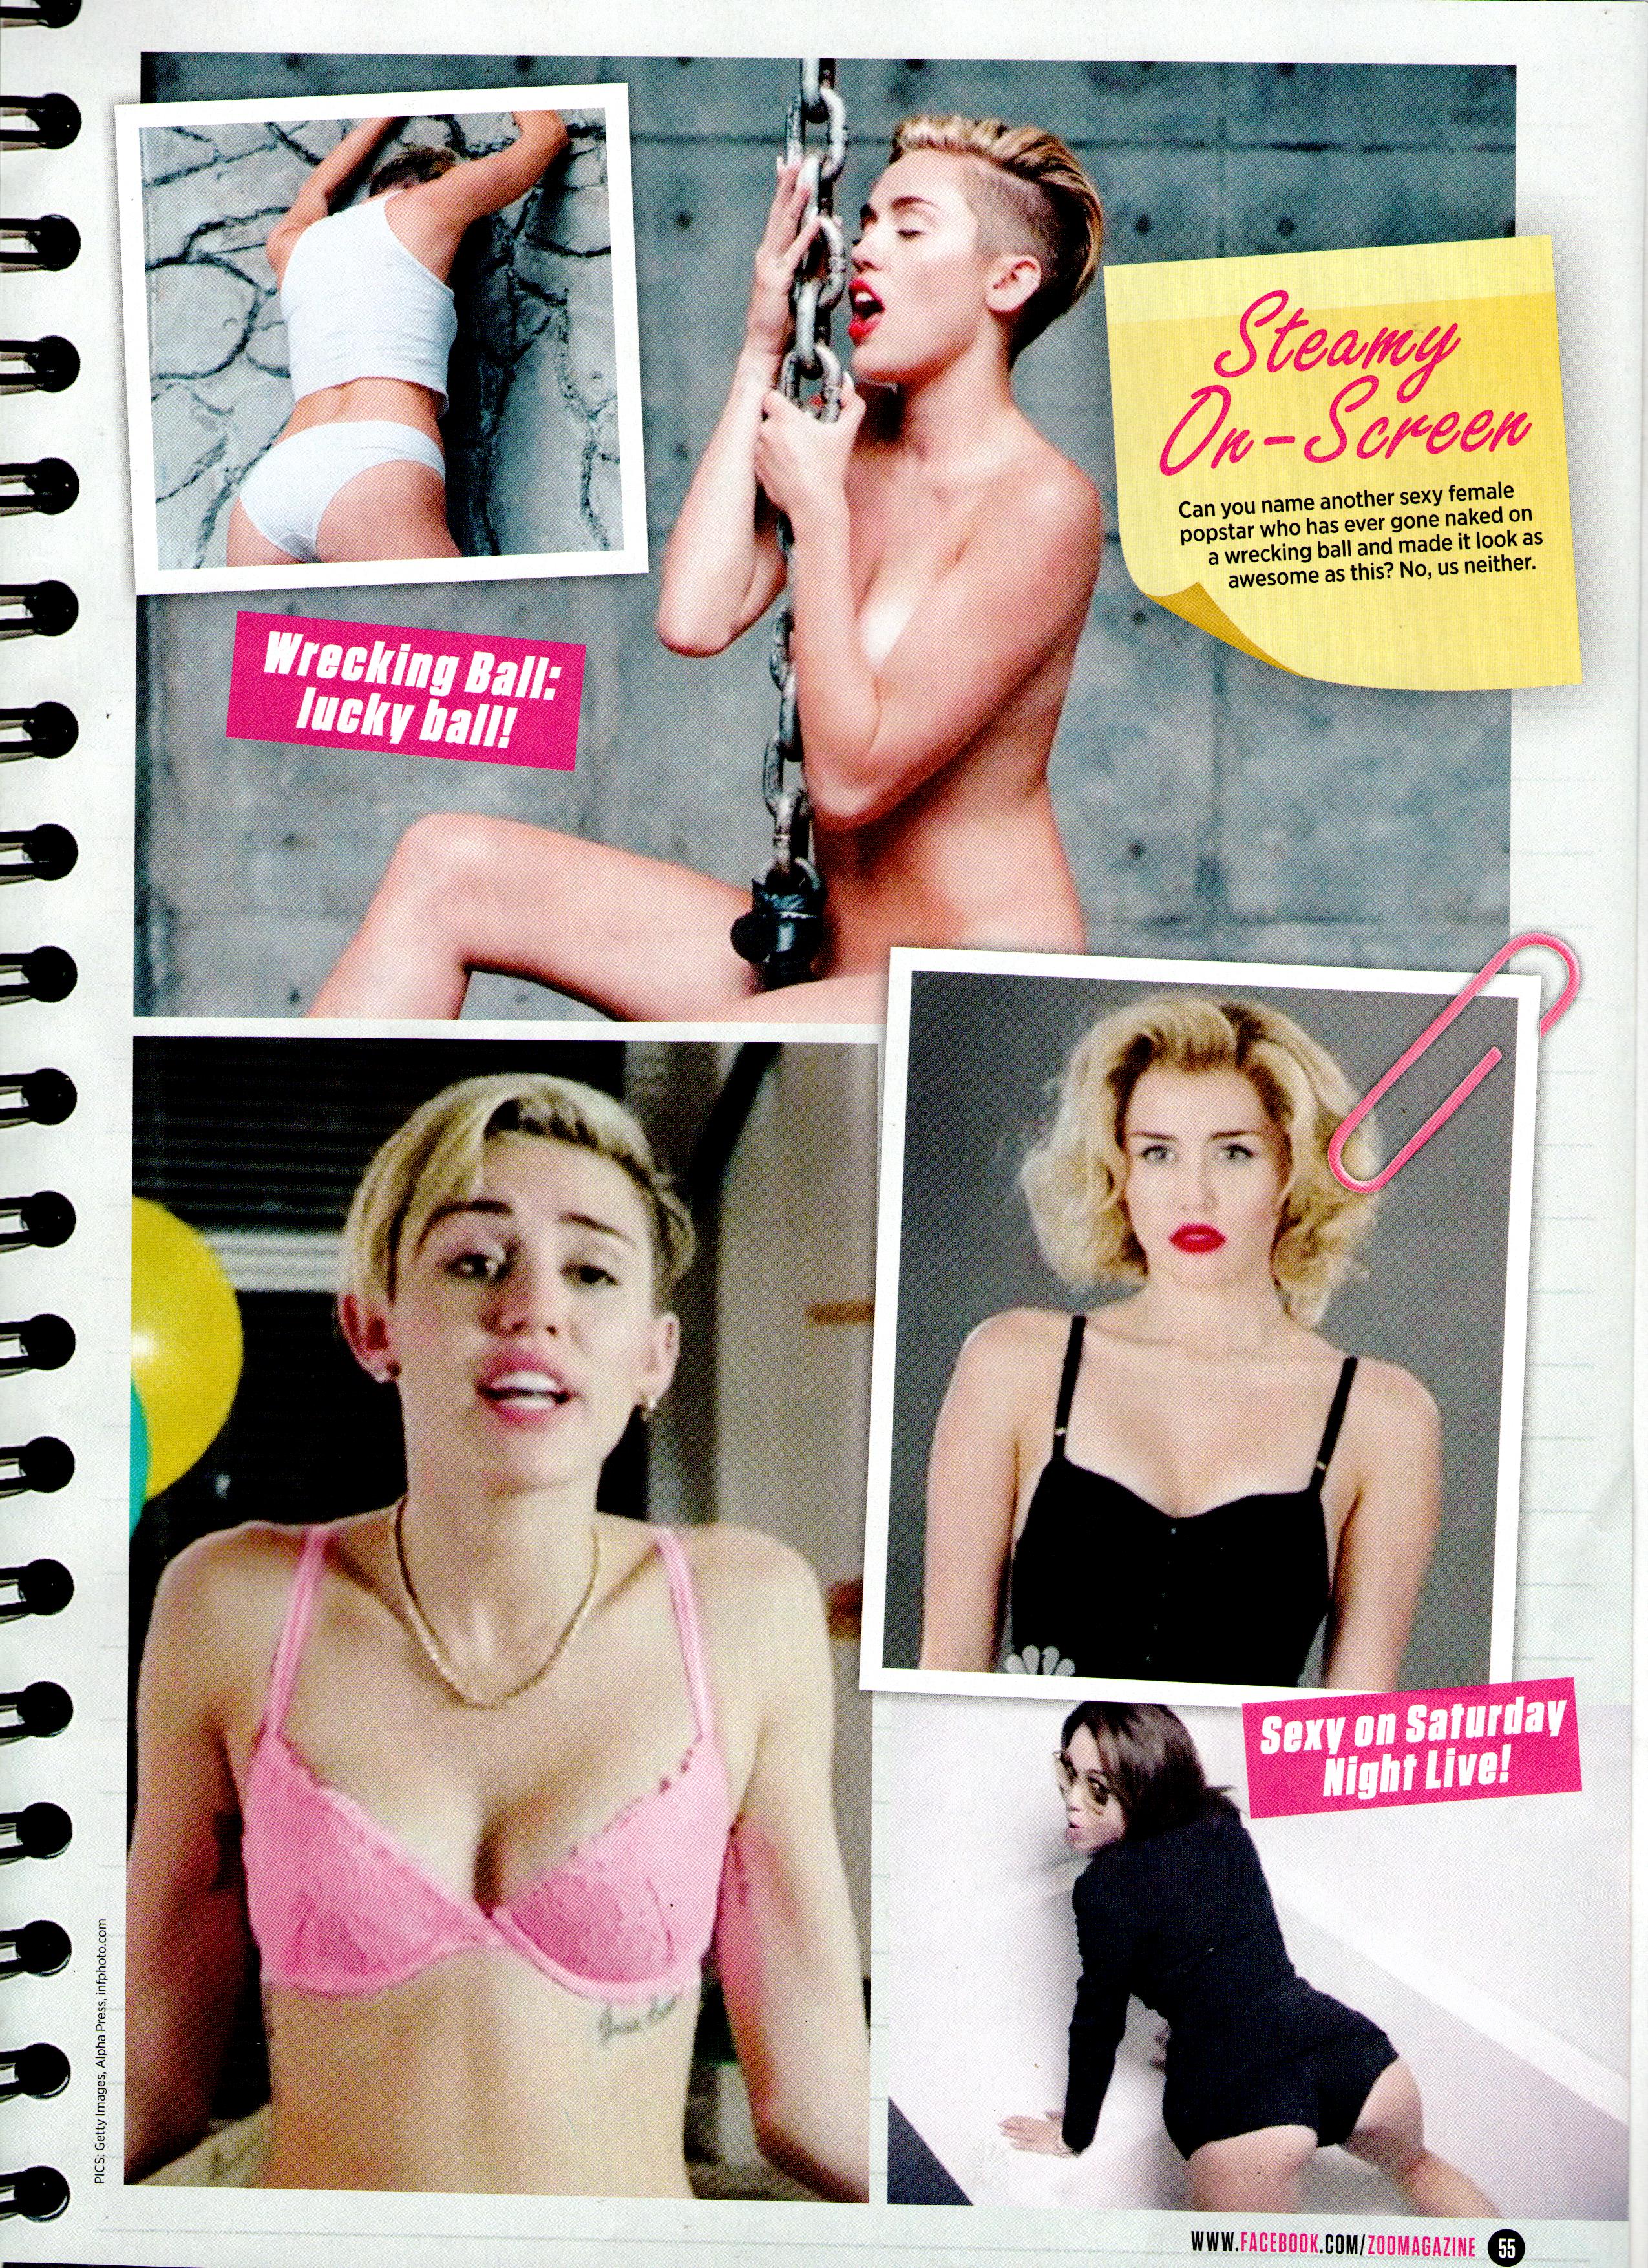 Too Sexy Miley Moments!